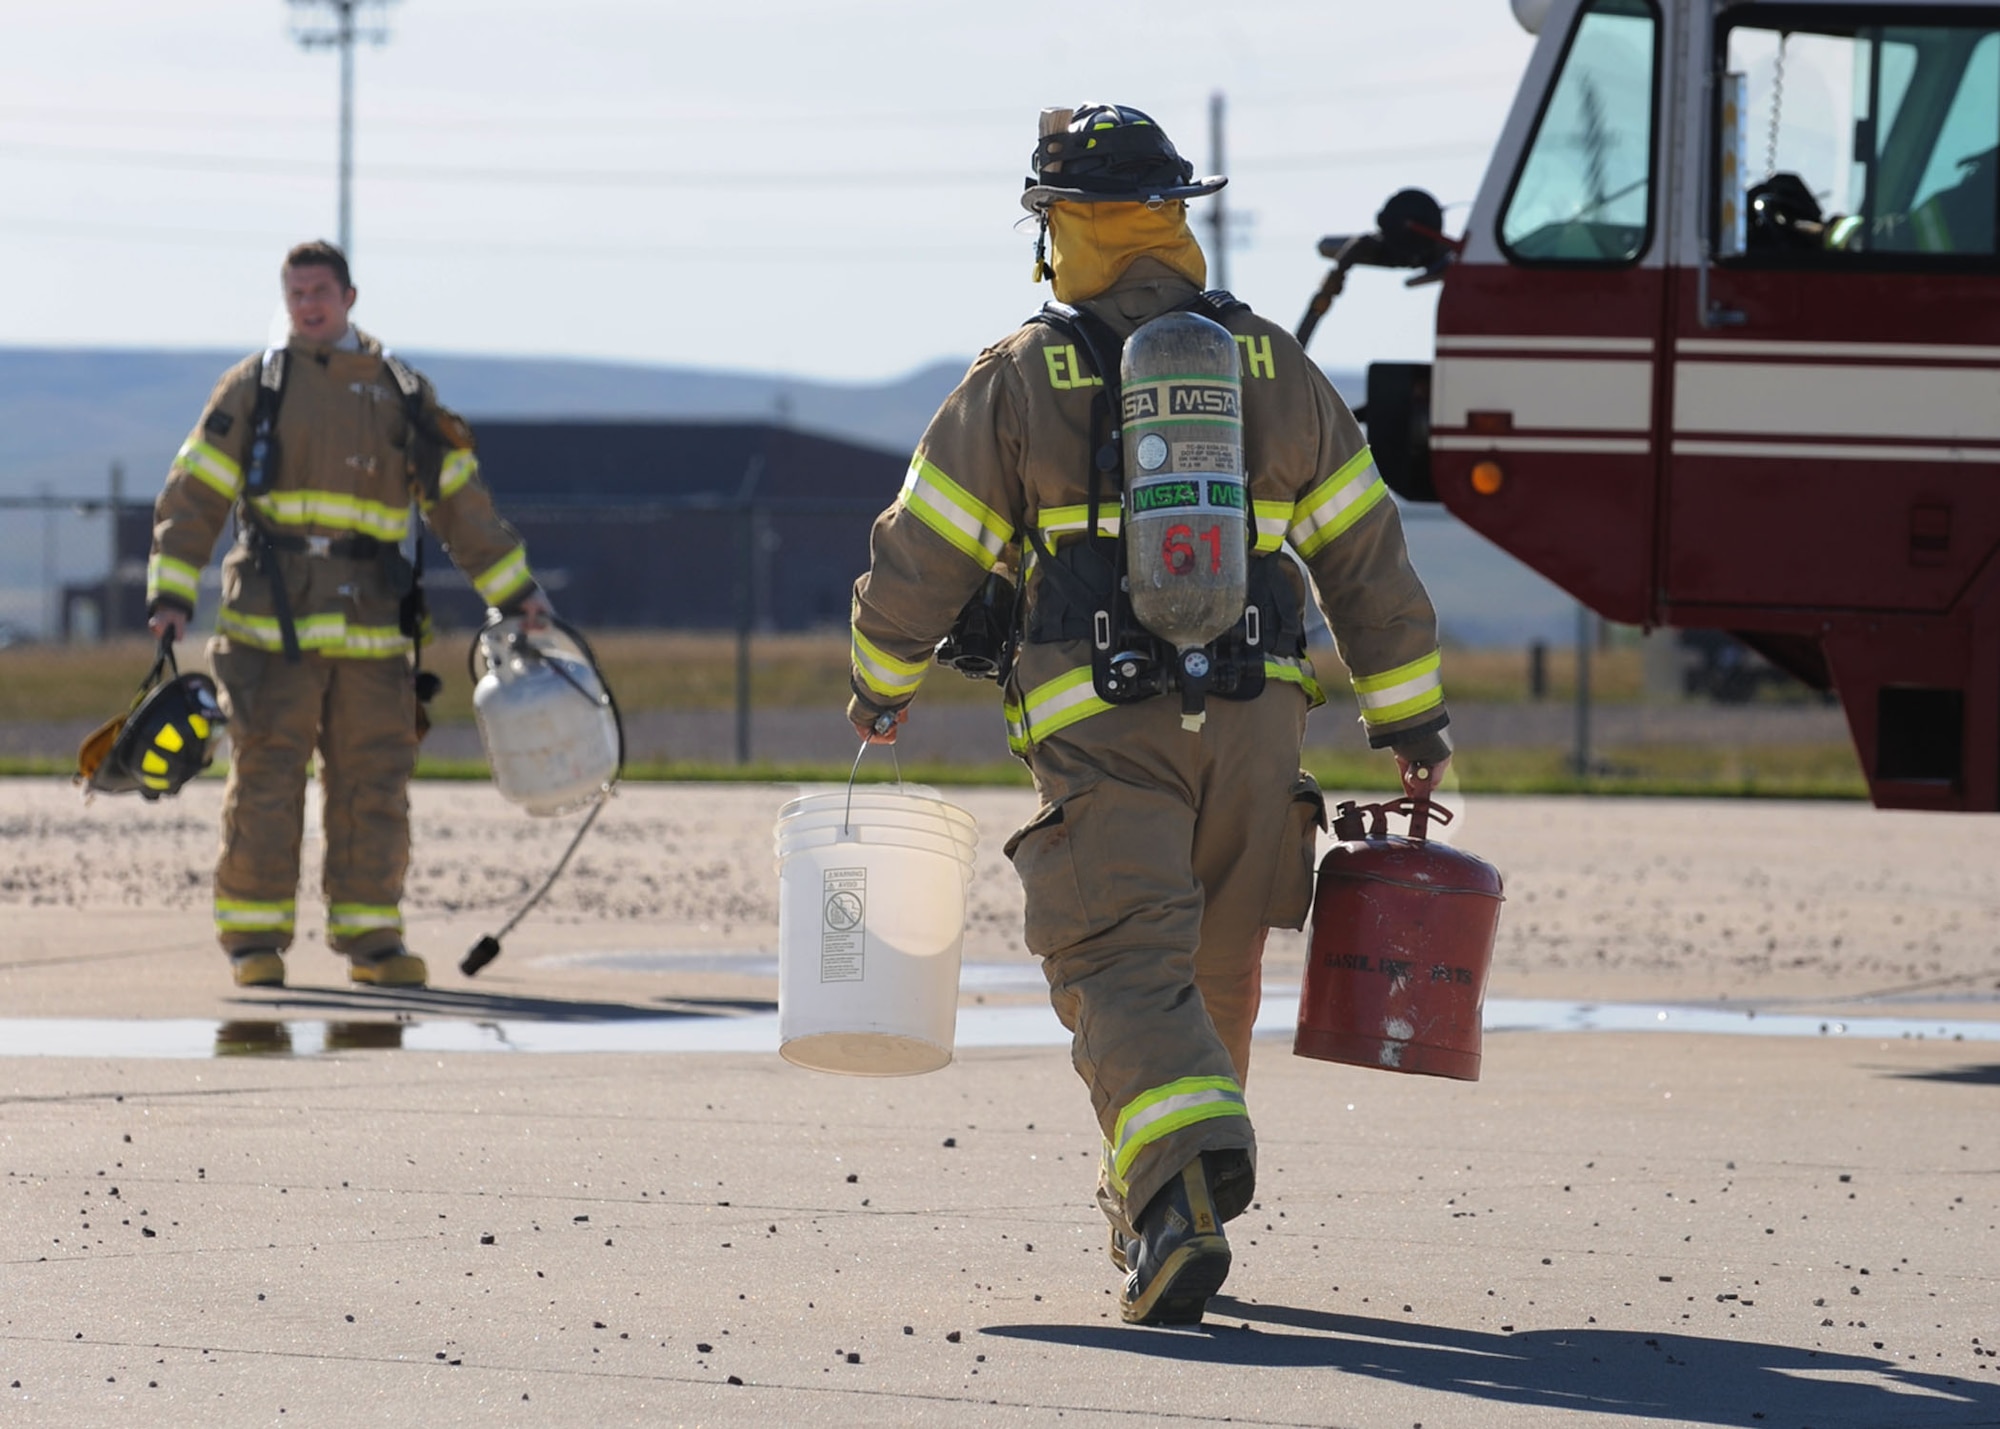 Jeremiah Hanna-Cruz (left), and Senior Airman Clinton Gatewood, 28th Civil Engineer Squadron fire safety driver operators, prepare to ignite a simulated aircraft fire during a pit burn training exercise at Ellsworth Air Force Base, S.D., Sept. 18, 2013. Fire pit training is designed to prepare firefighters to safely and effectively respond to aircraft fires. (U.S. Air Force photo by Airman 1st Class Rebecca Imwalle / Released)